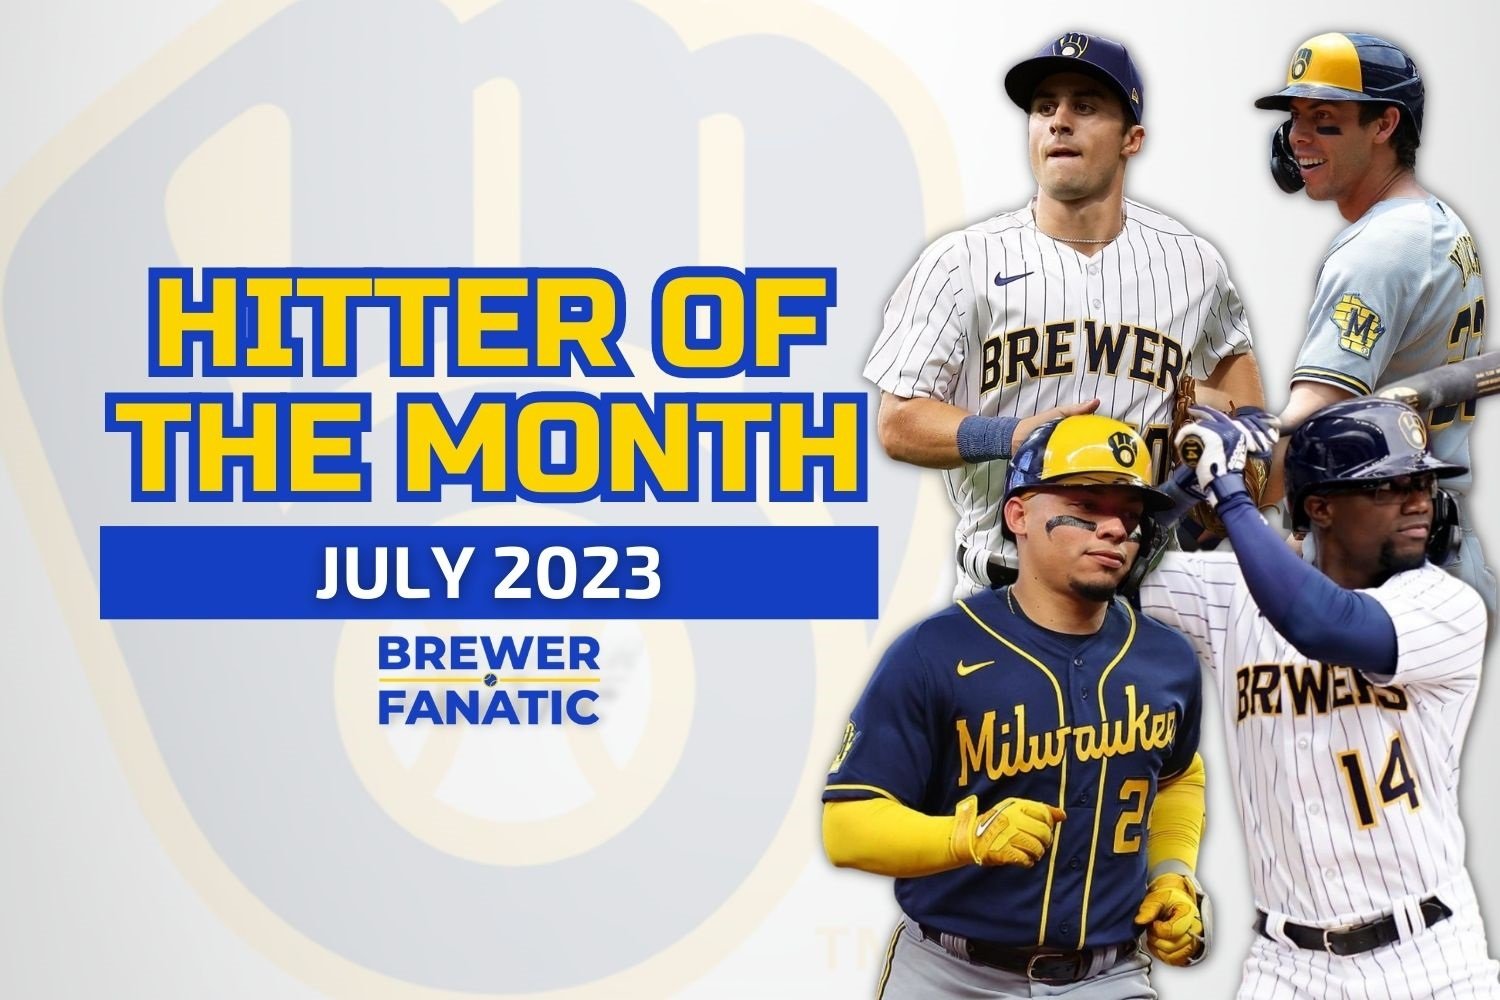 Milwaukee Brewers Hitter of The Month: July 2023 - Brewers - Brewer Fanatic